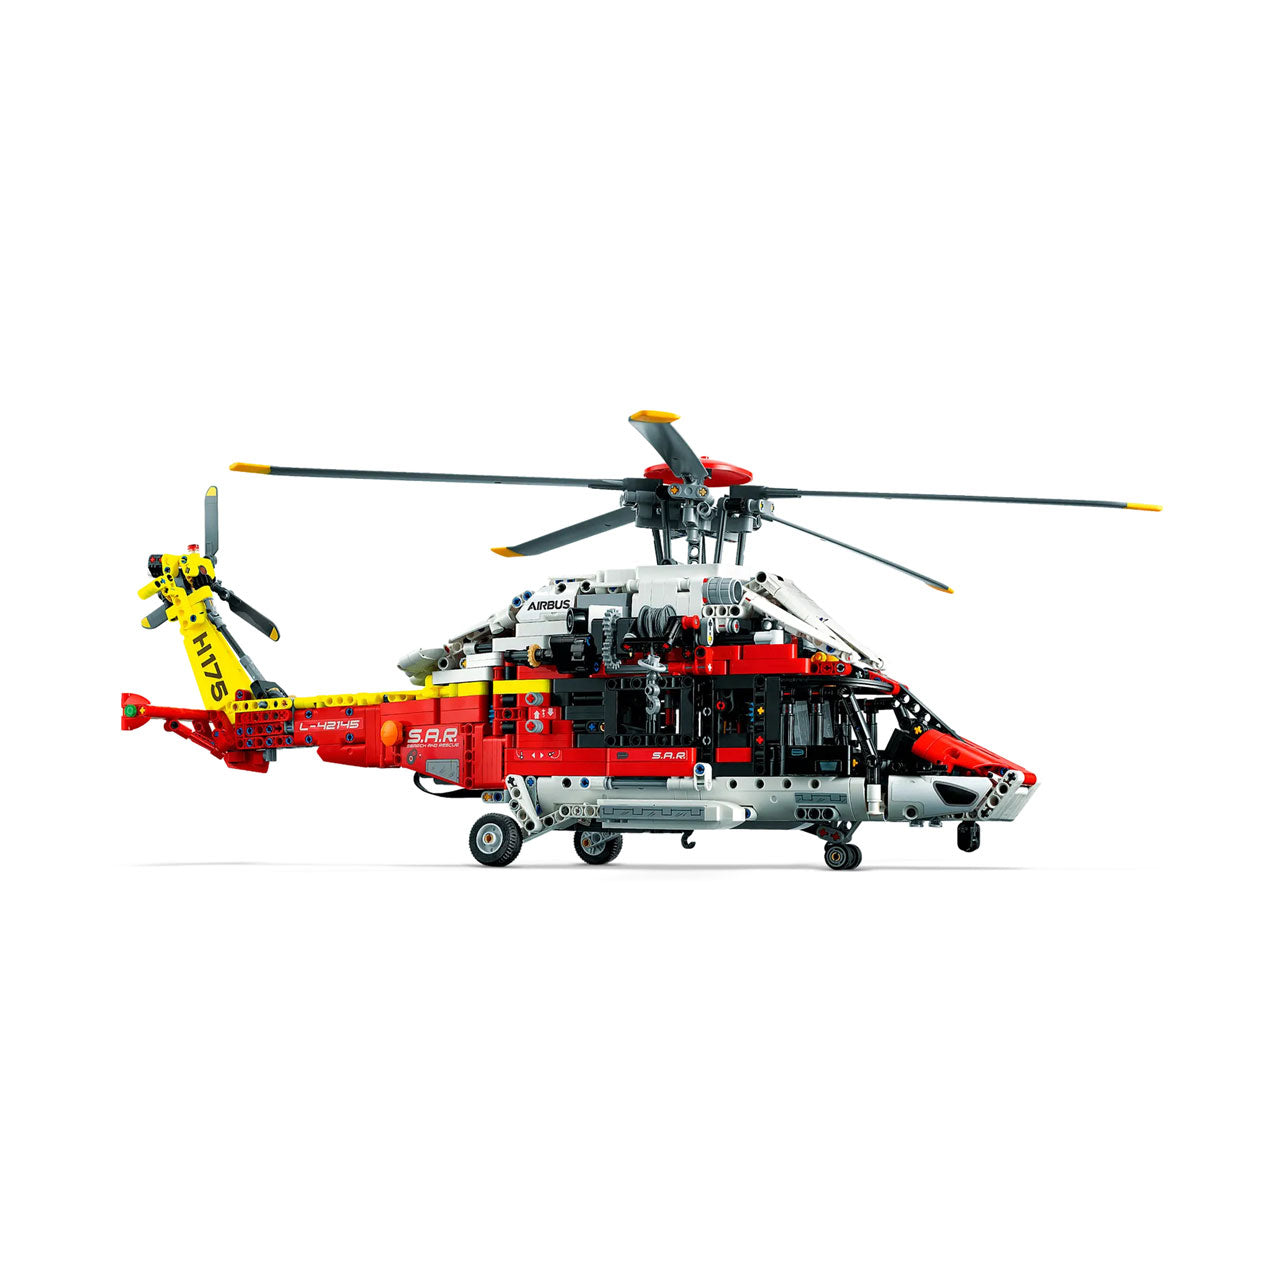 LEGO Airbus H175 Rescue Helicopter, #LEGO #Airbus #H175 #Rescue #Helicopter